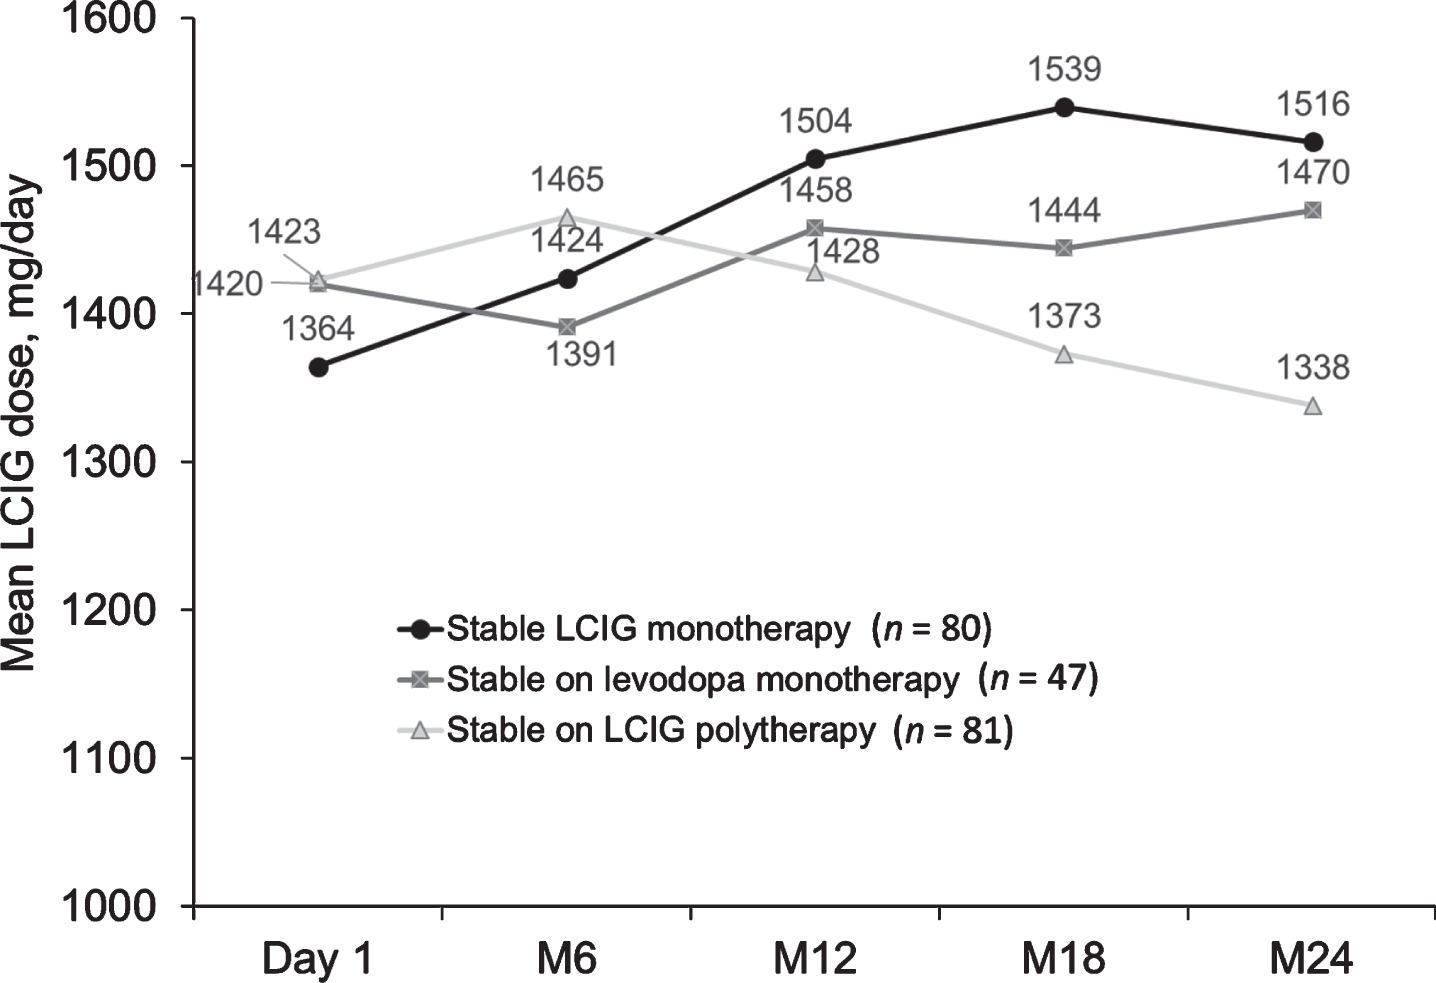 Mean LCIG dose in patients on stable monotherapy or polytherapy at regularly scheduled visits. LCIG, levodopa-carbidopa intestinal gel; M, month.